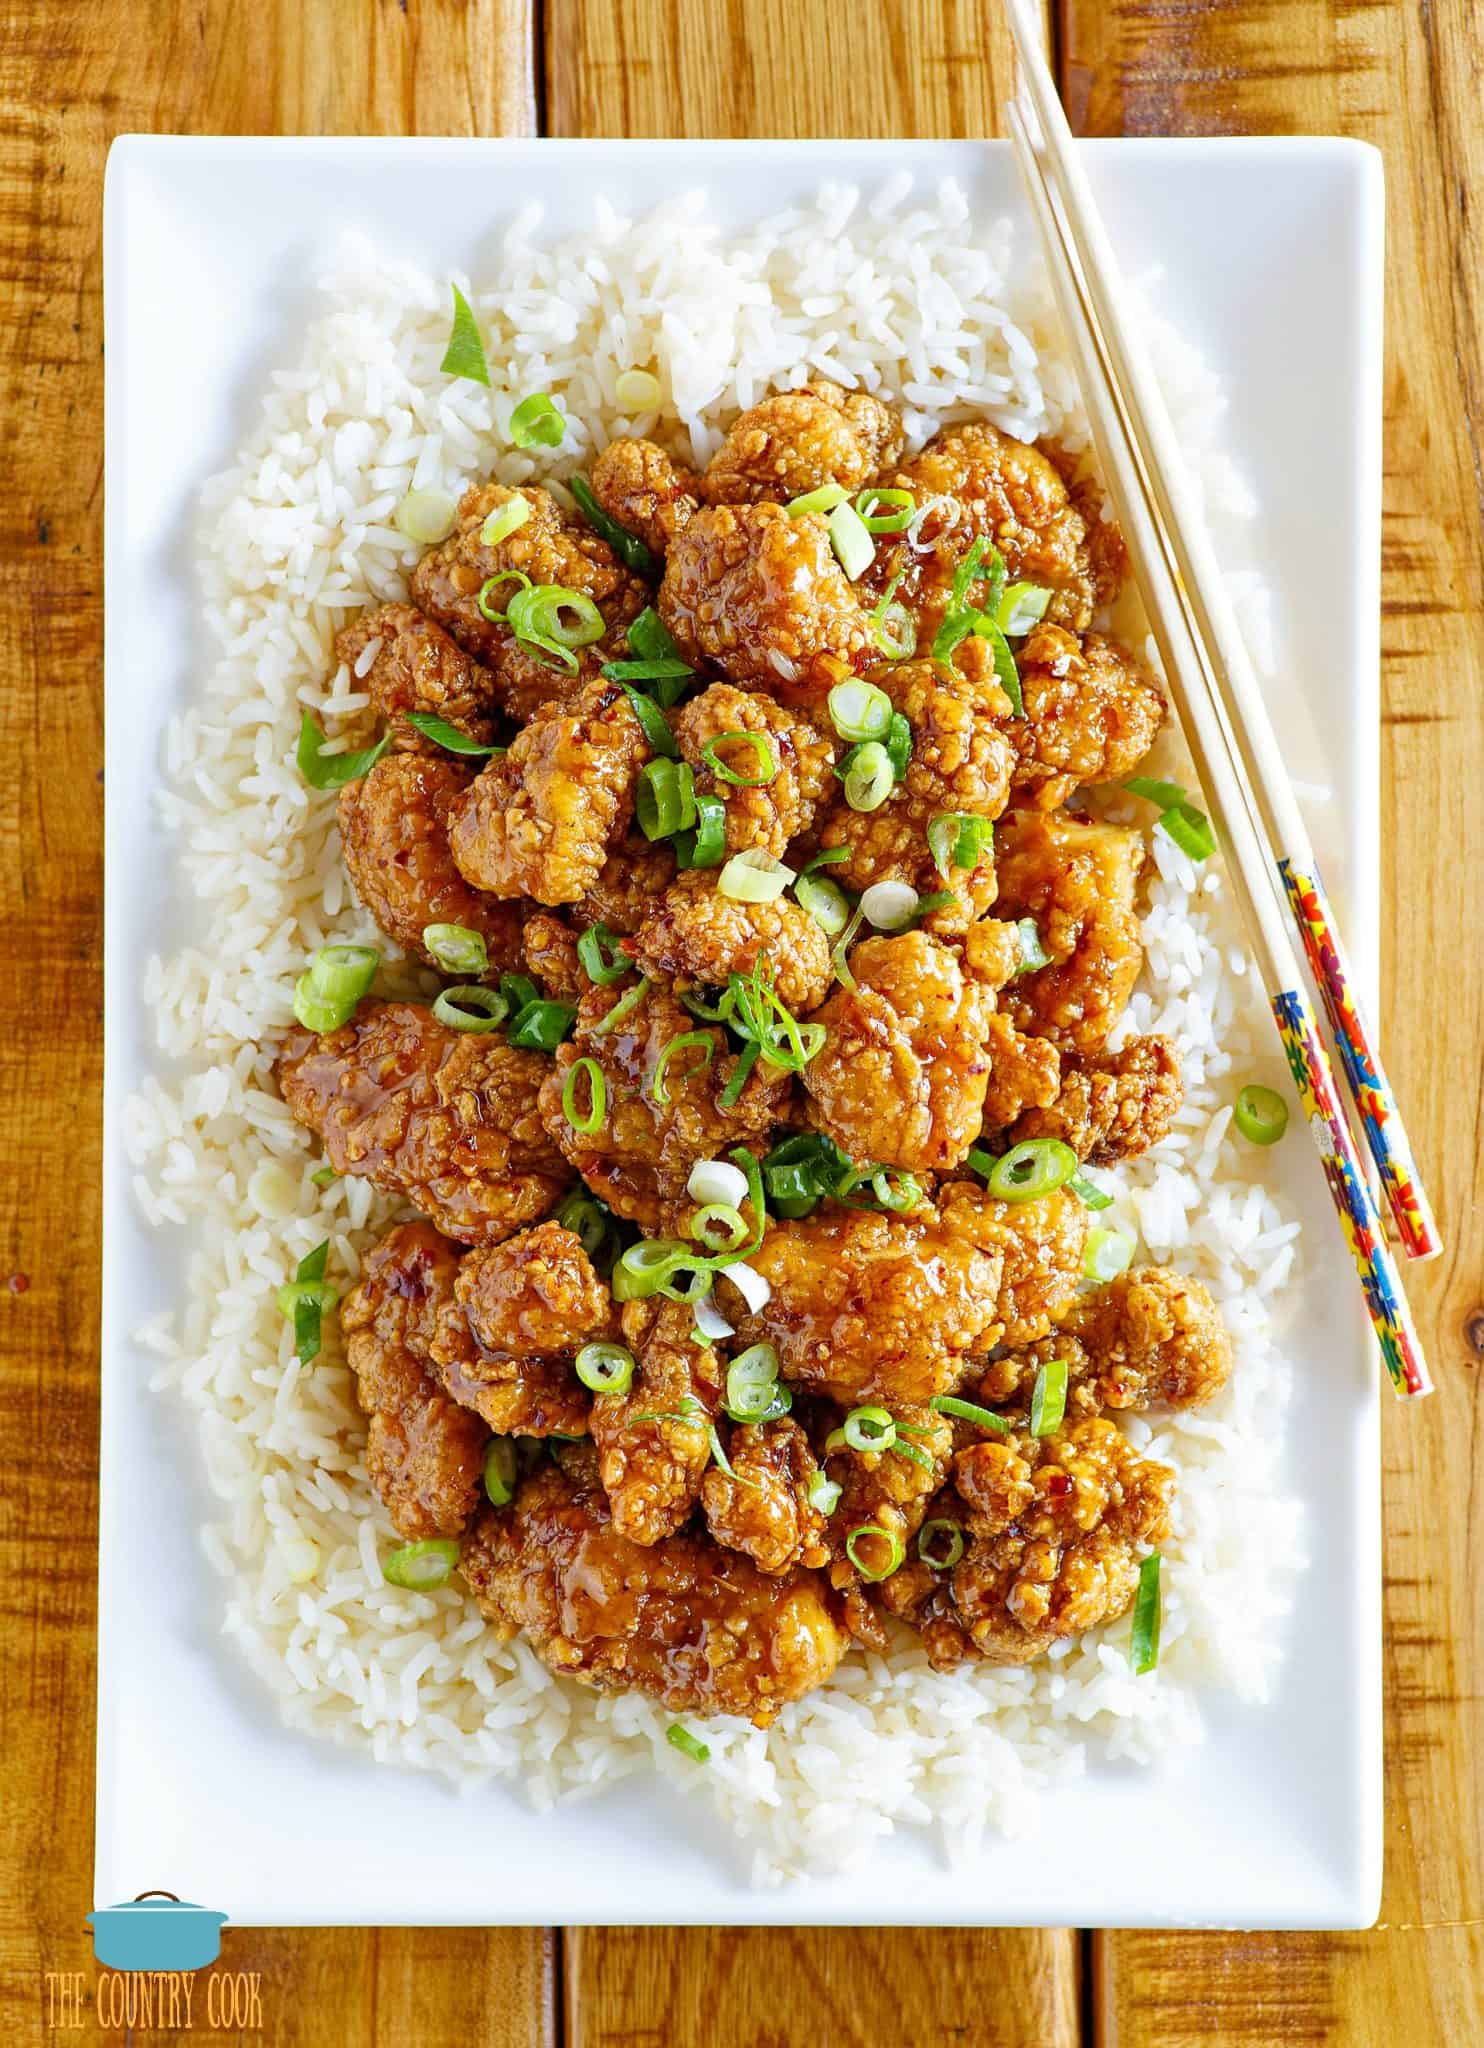 Honey Garlic Glazed Asian Popcorn Chicken on top of white rice shown on a large white rectangle plate with chopsticks on the side.